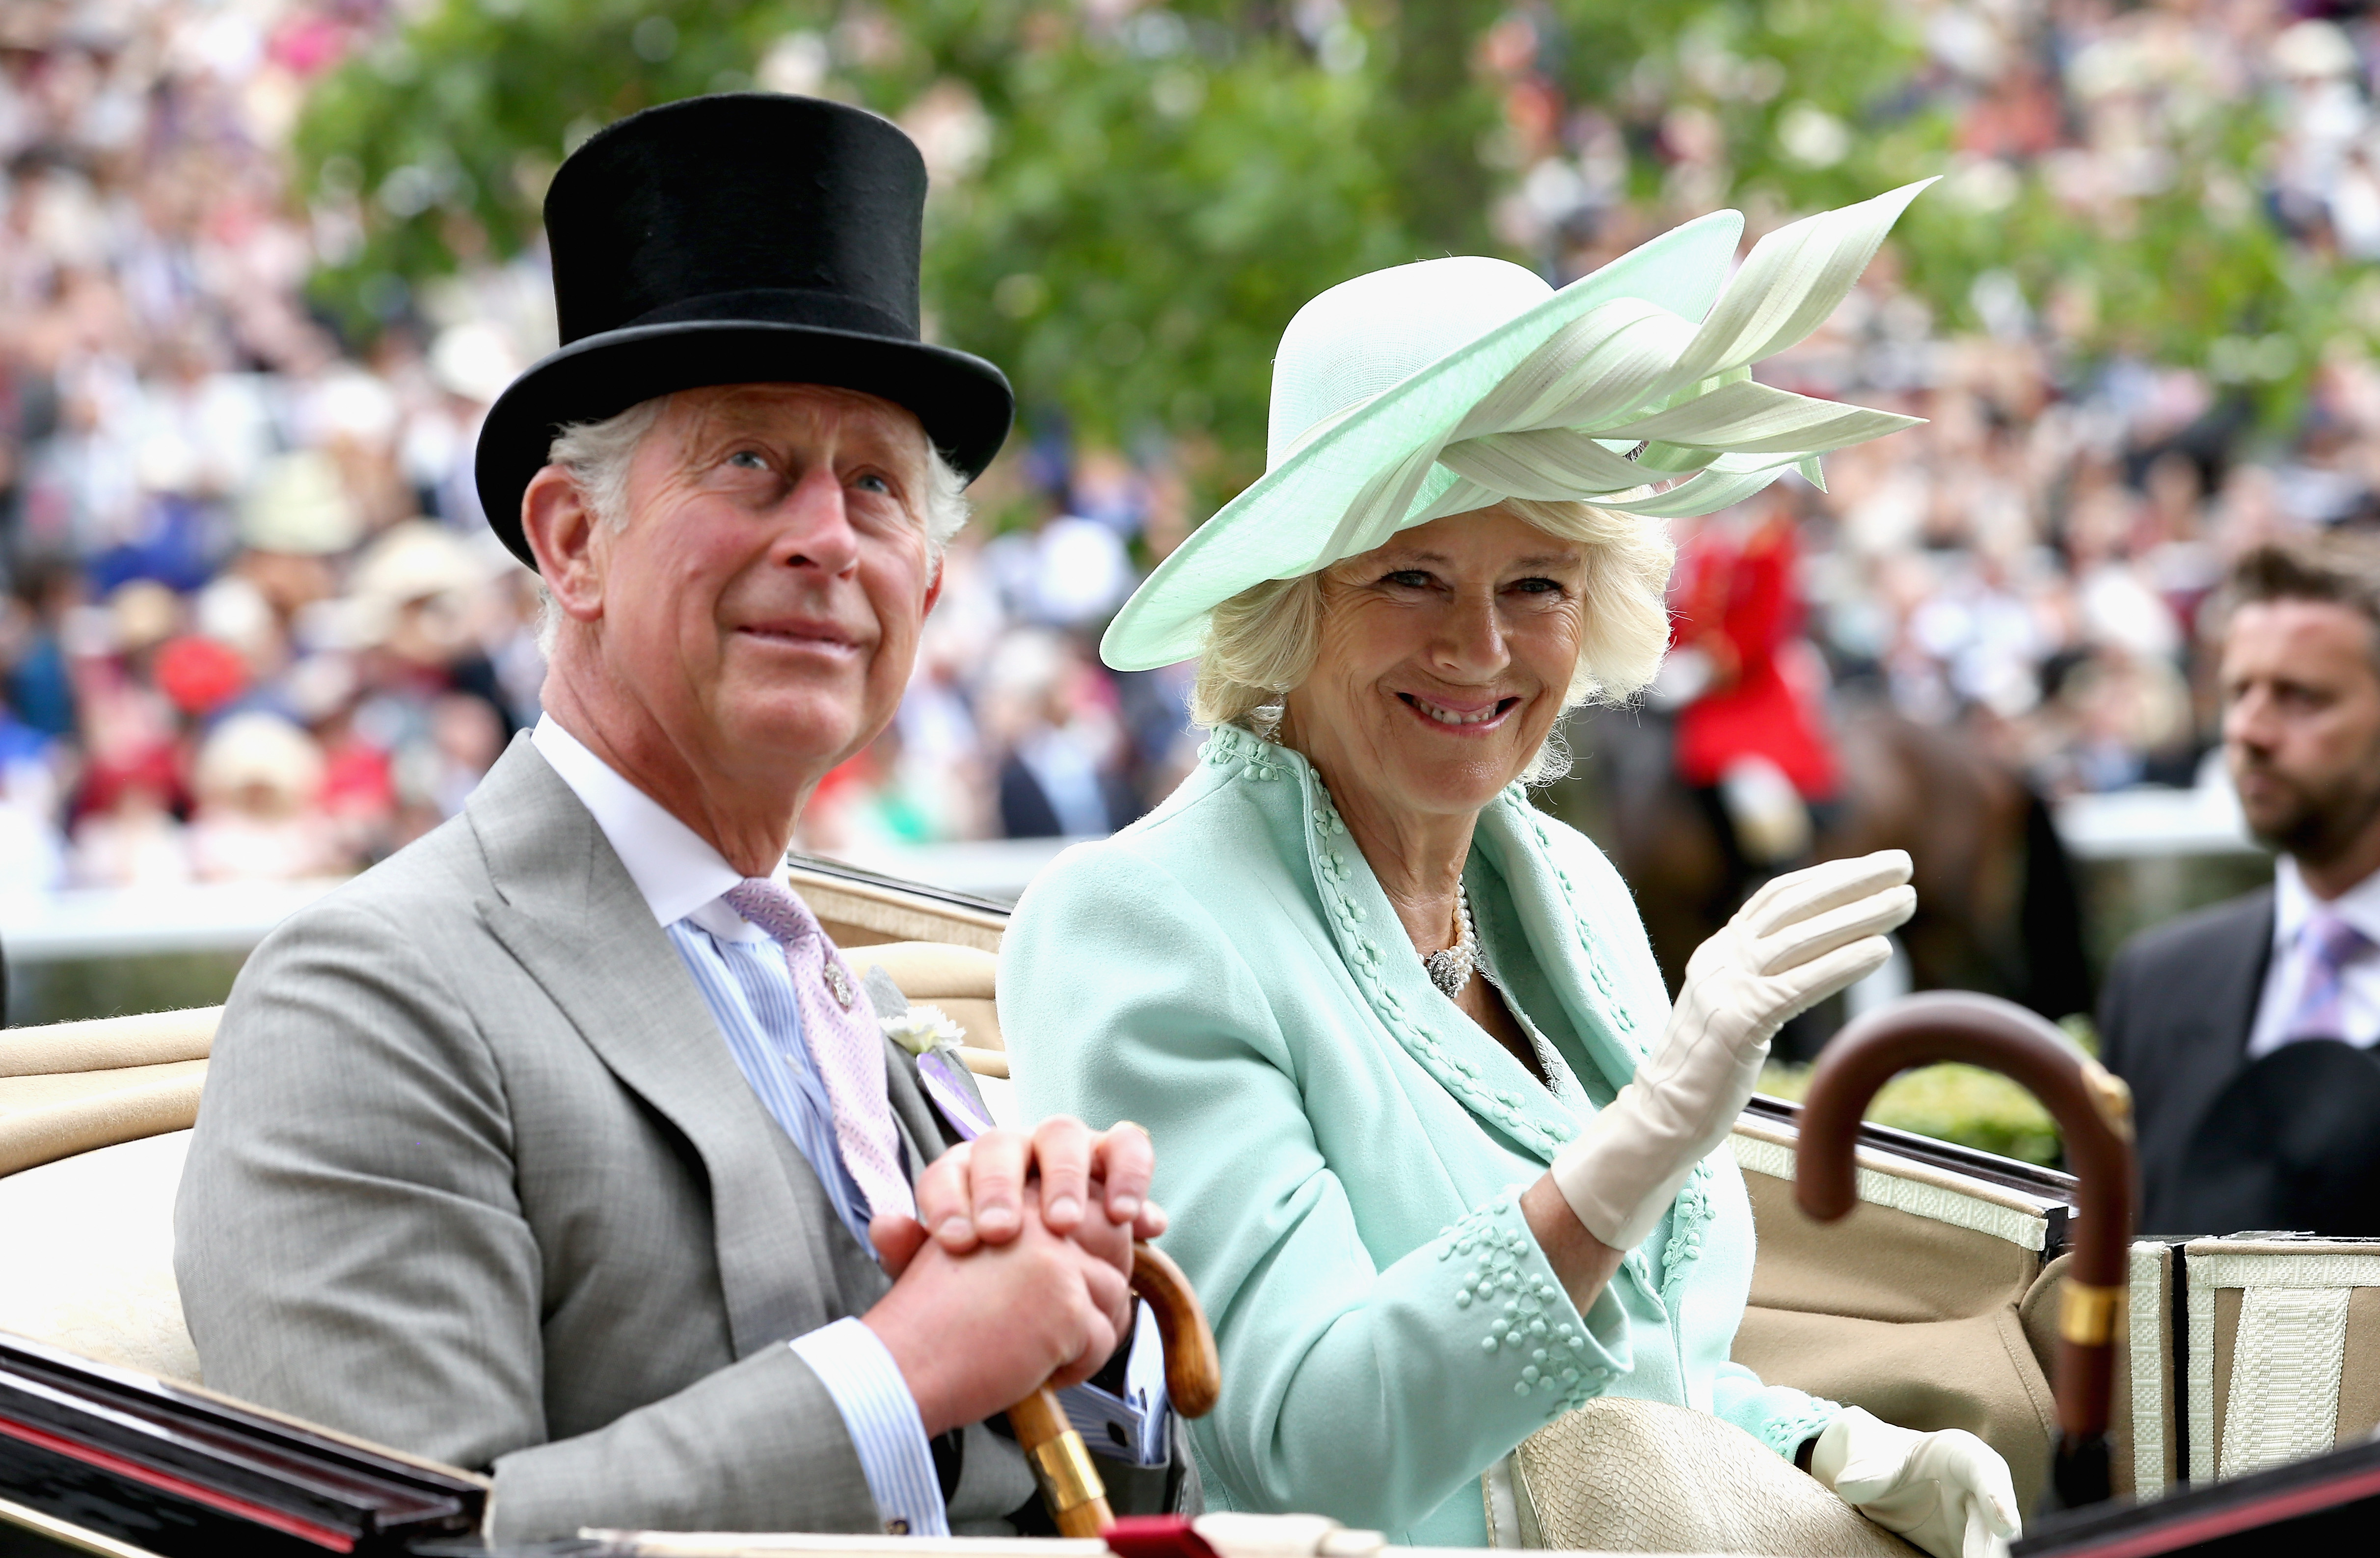 King Charles III and Queen Camilla during day 1 of the Royal Ascot in Ascot, England on June 16, 2015 | Source: Getty Images